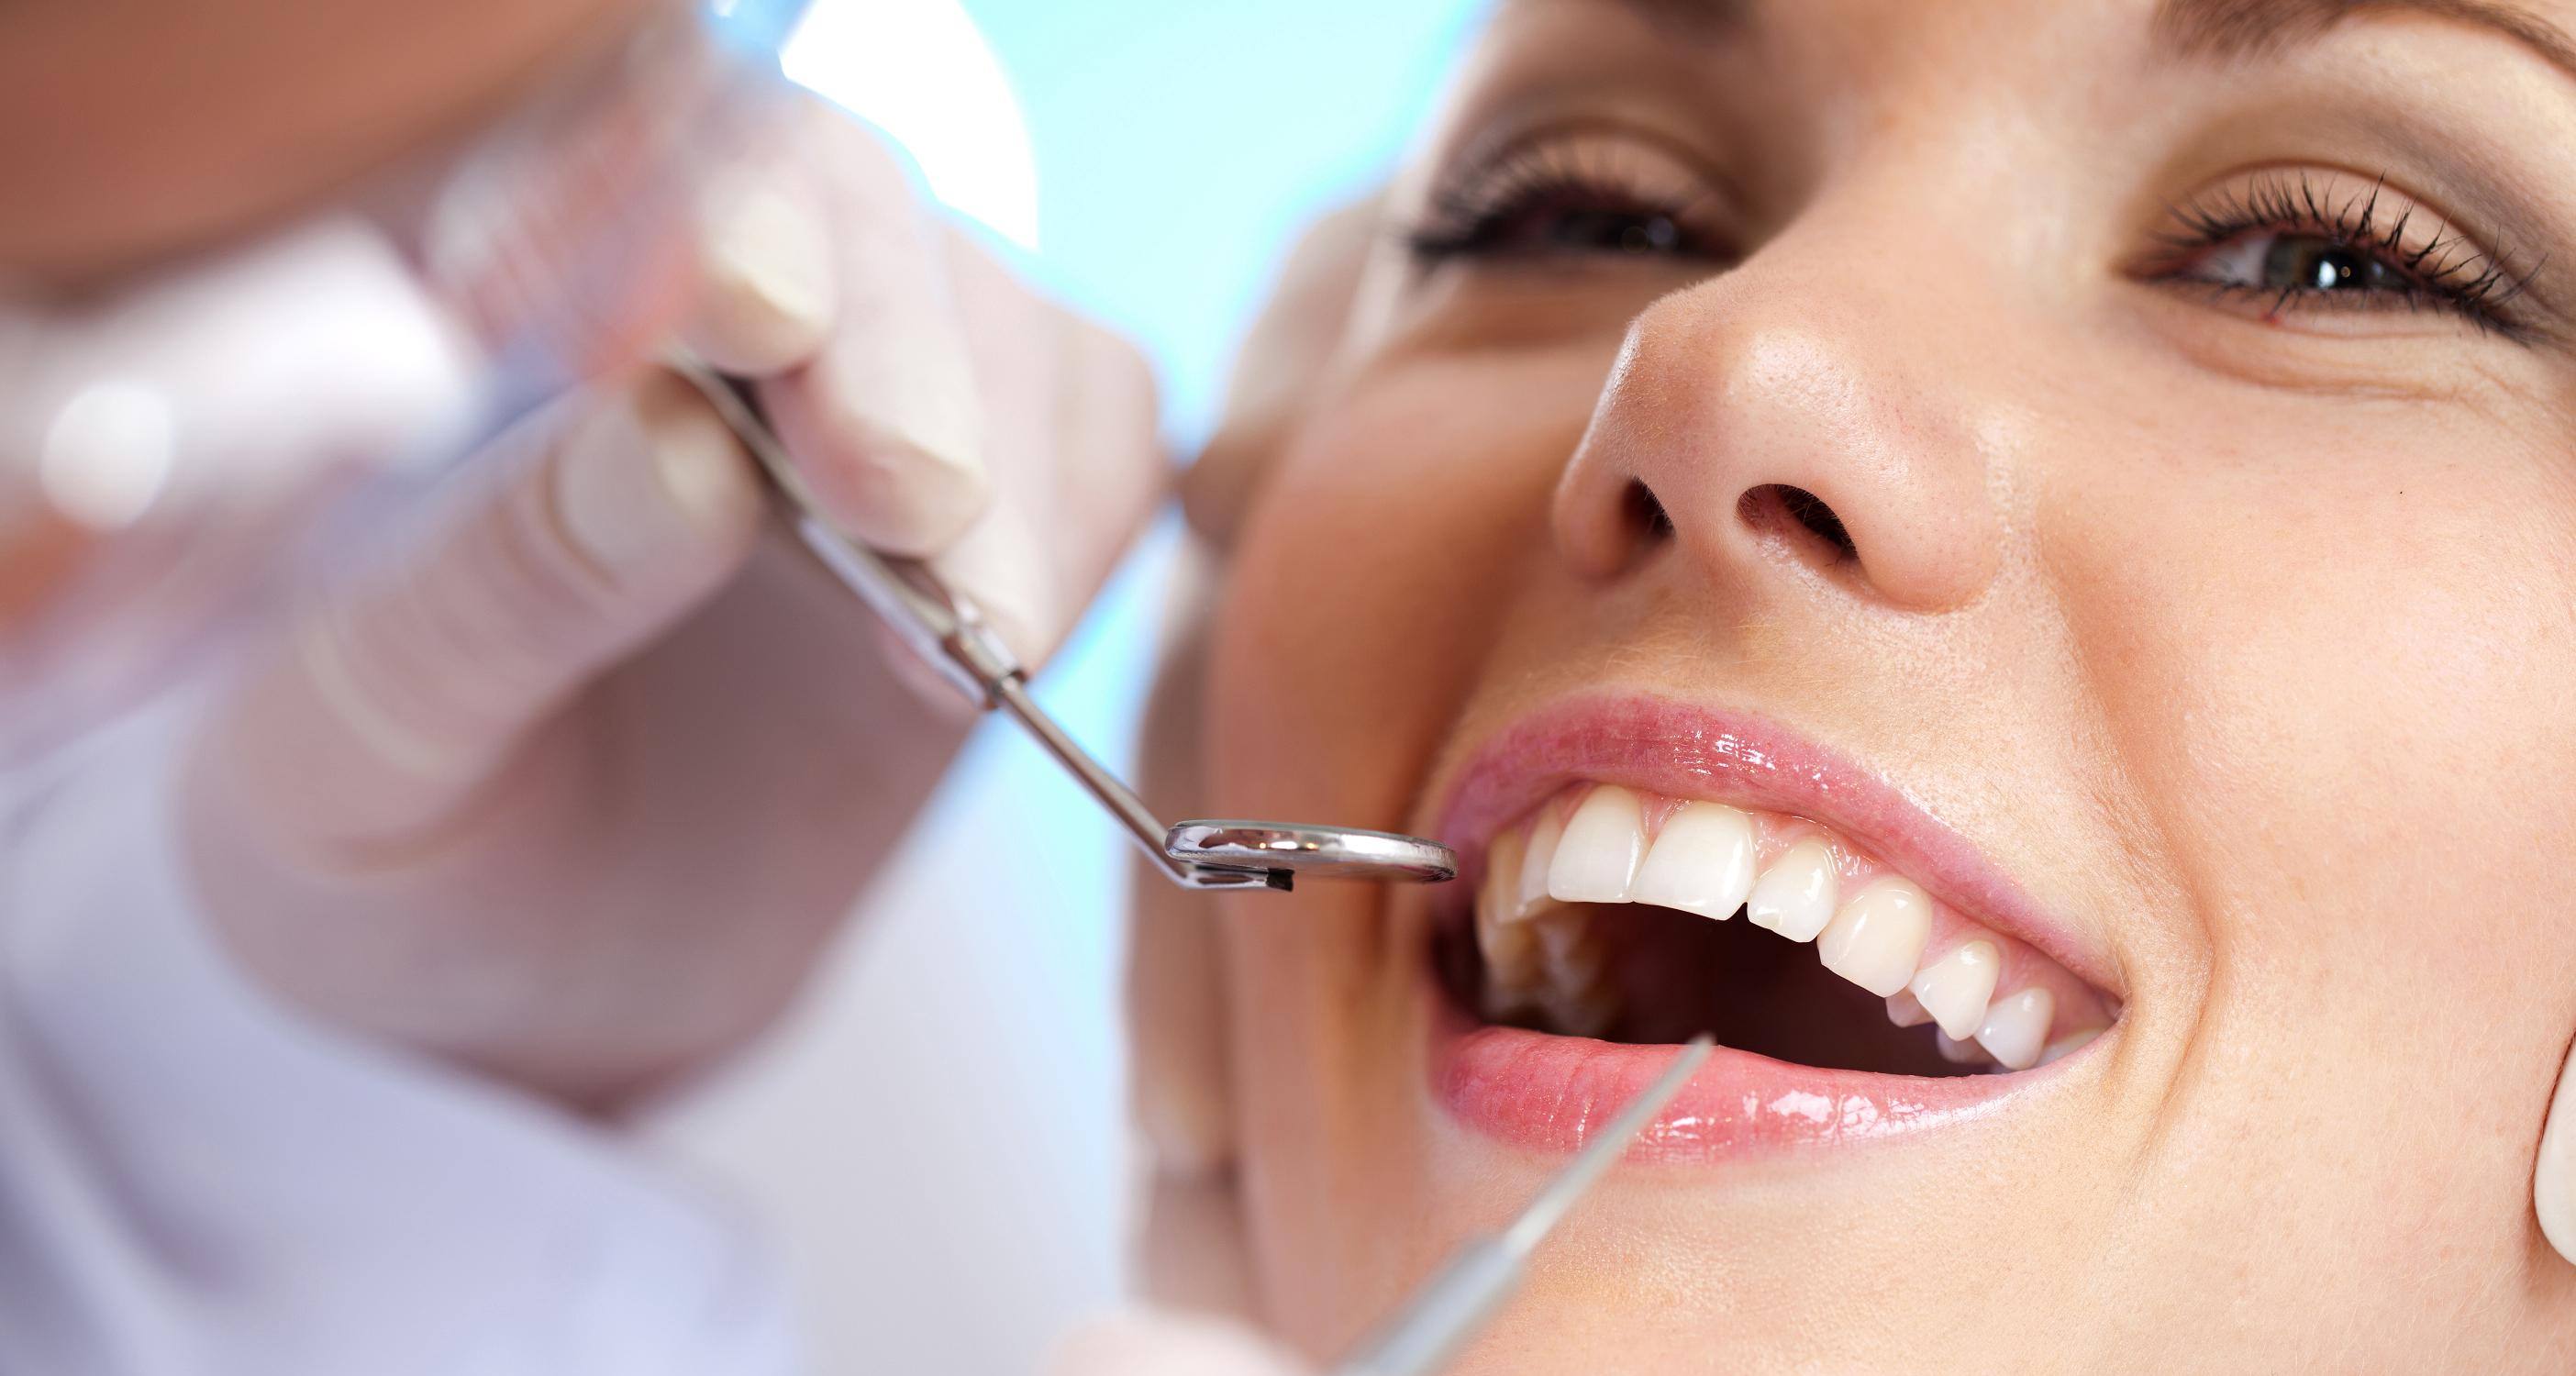 Teeth Cleaning in New York NY